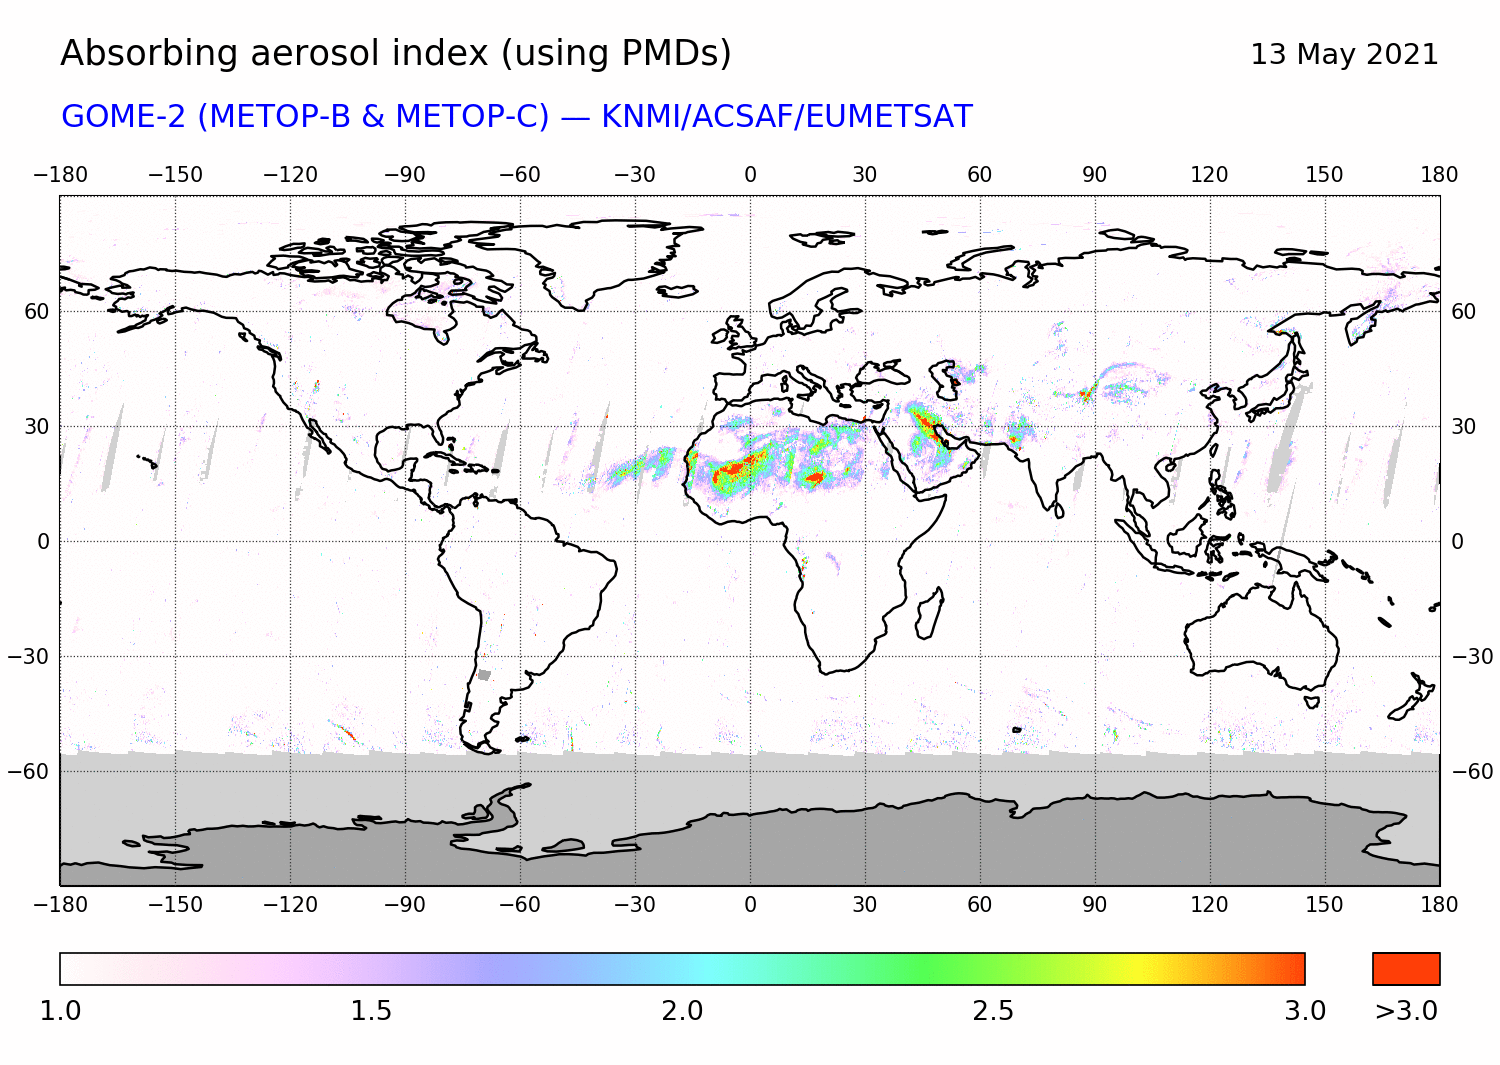 GOME-2 - Absorbing aerosol index of 13 May 2021